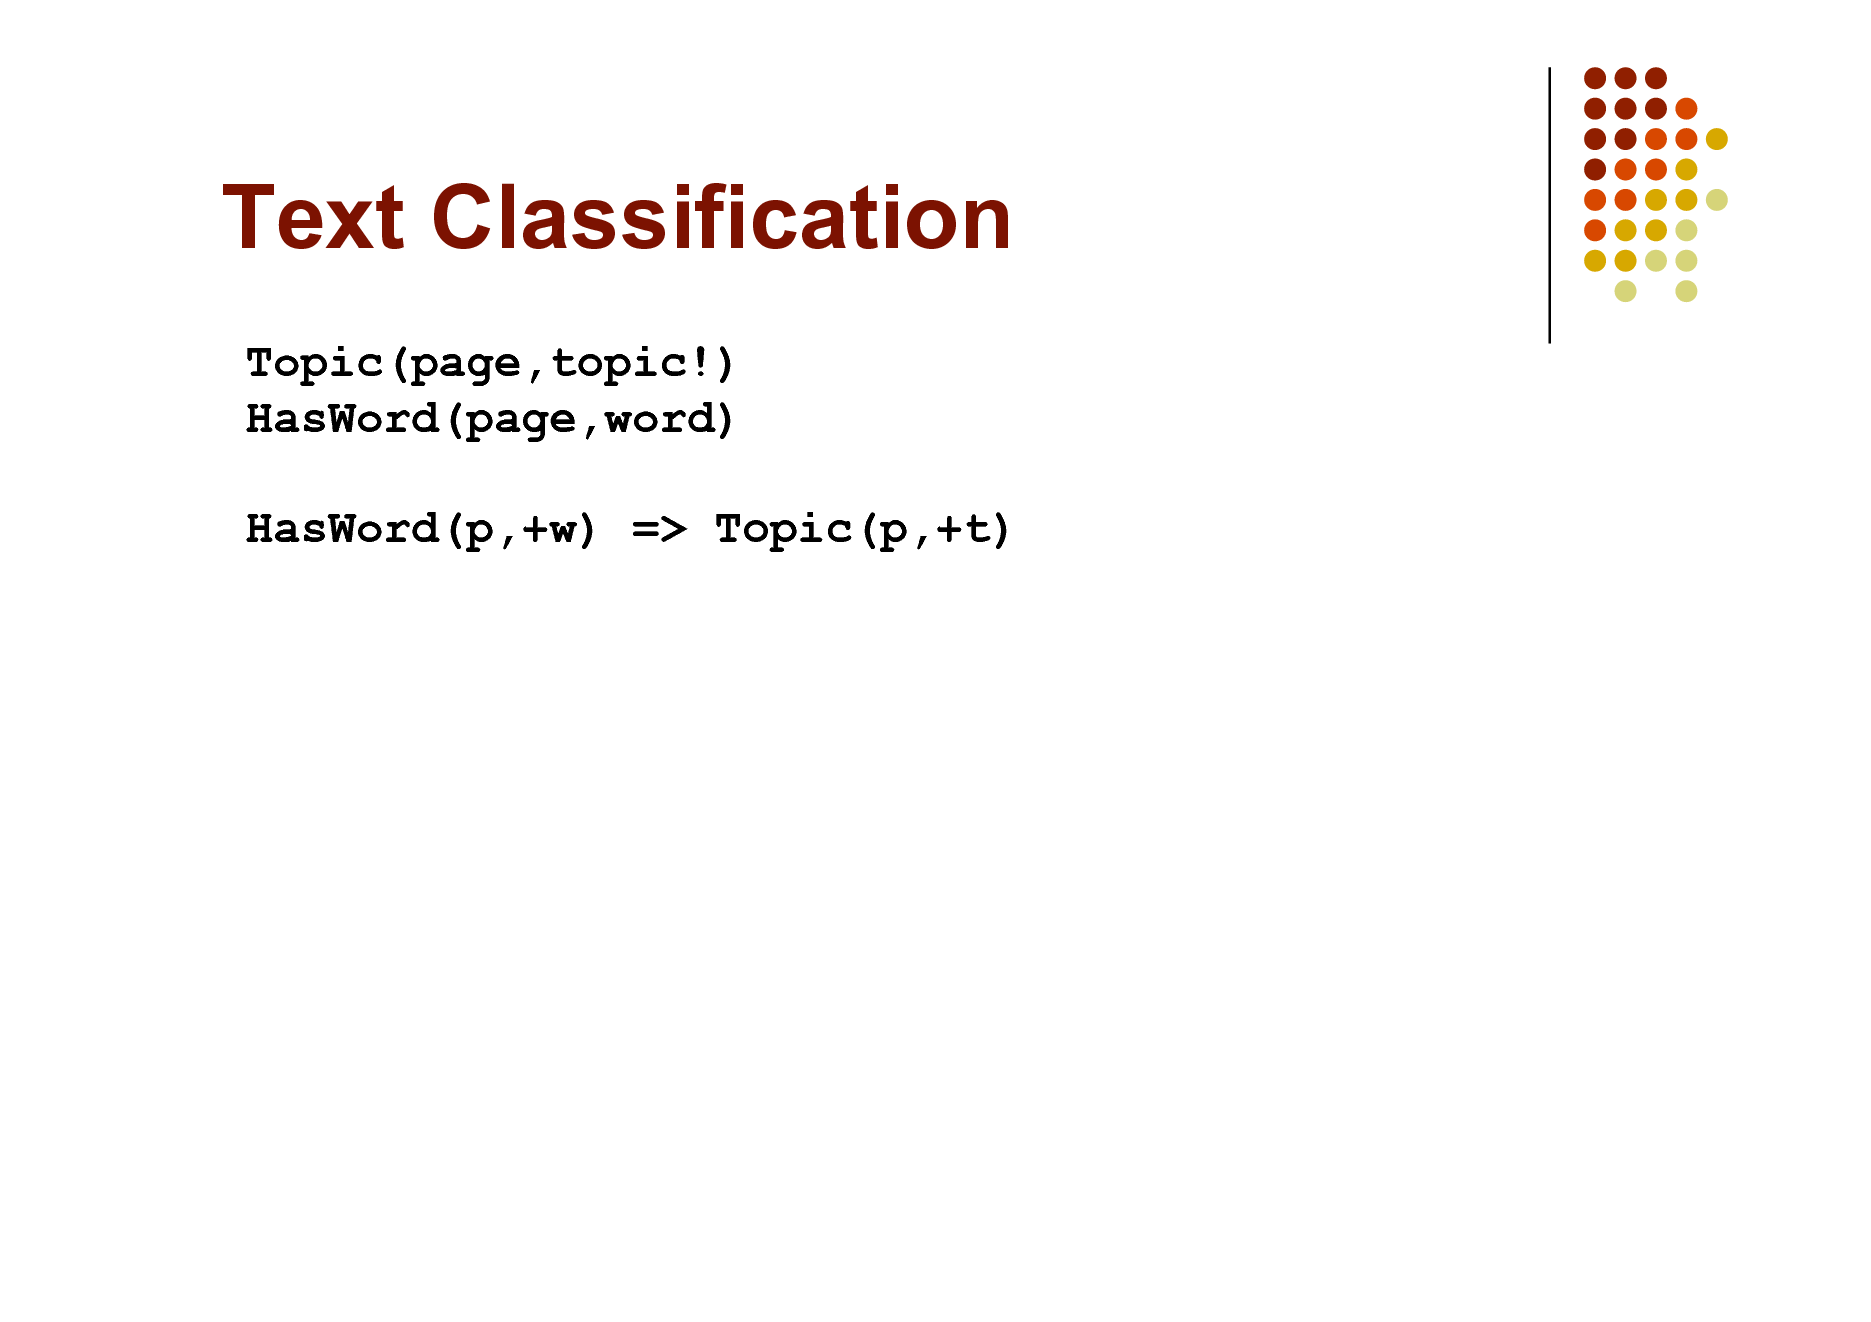 Slide: Text Classification
Topic(page,topic!) HasWord(page,word) HasWord(p,+w) => Topic(p,+t)

